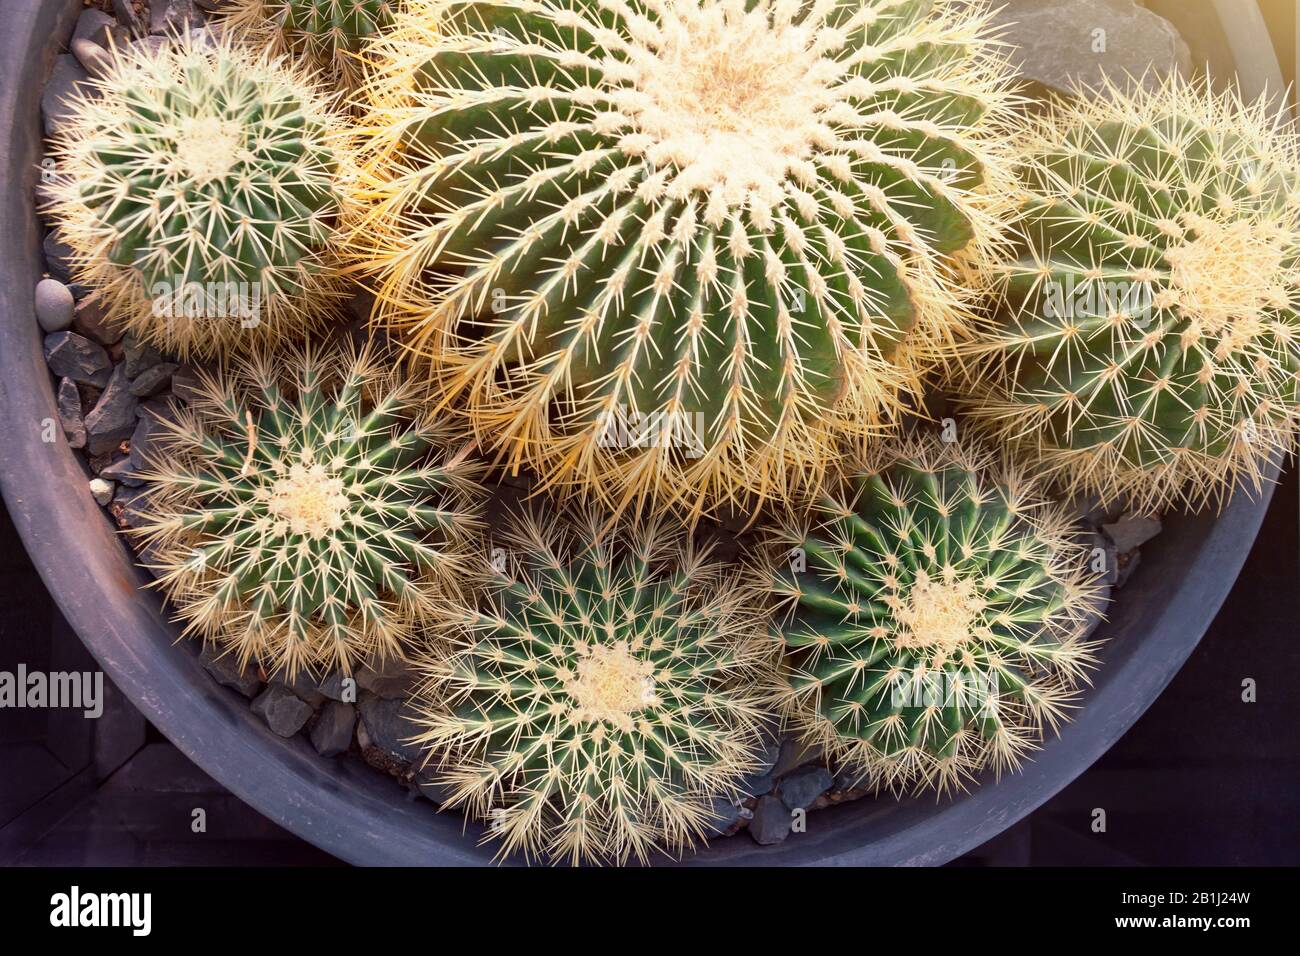 Several round large cacti in a pot, top view Stock Photo